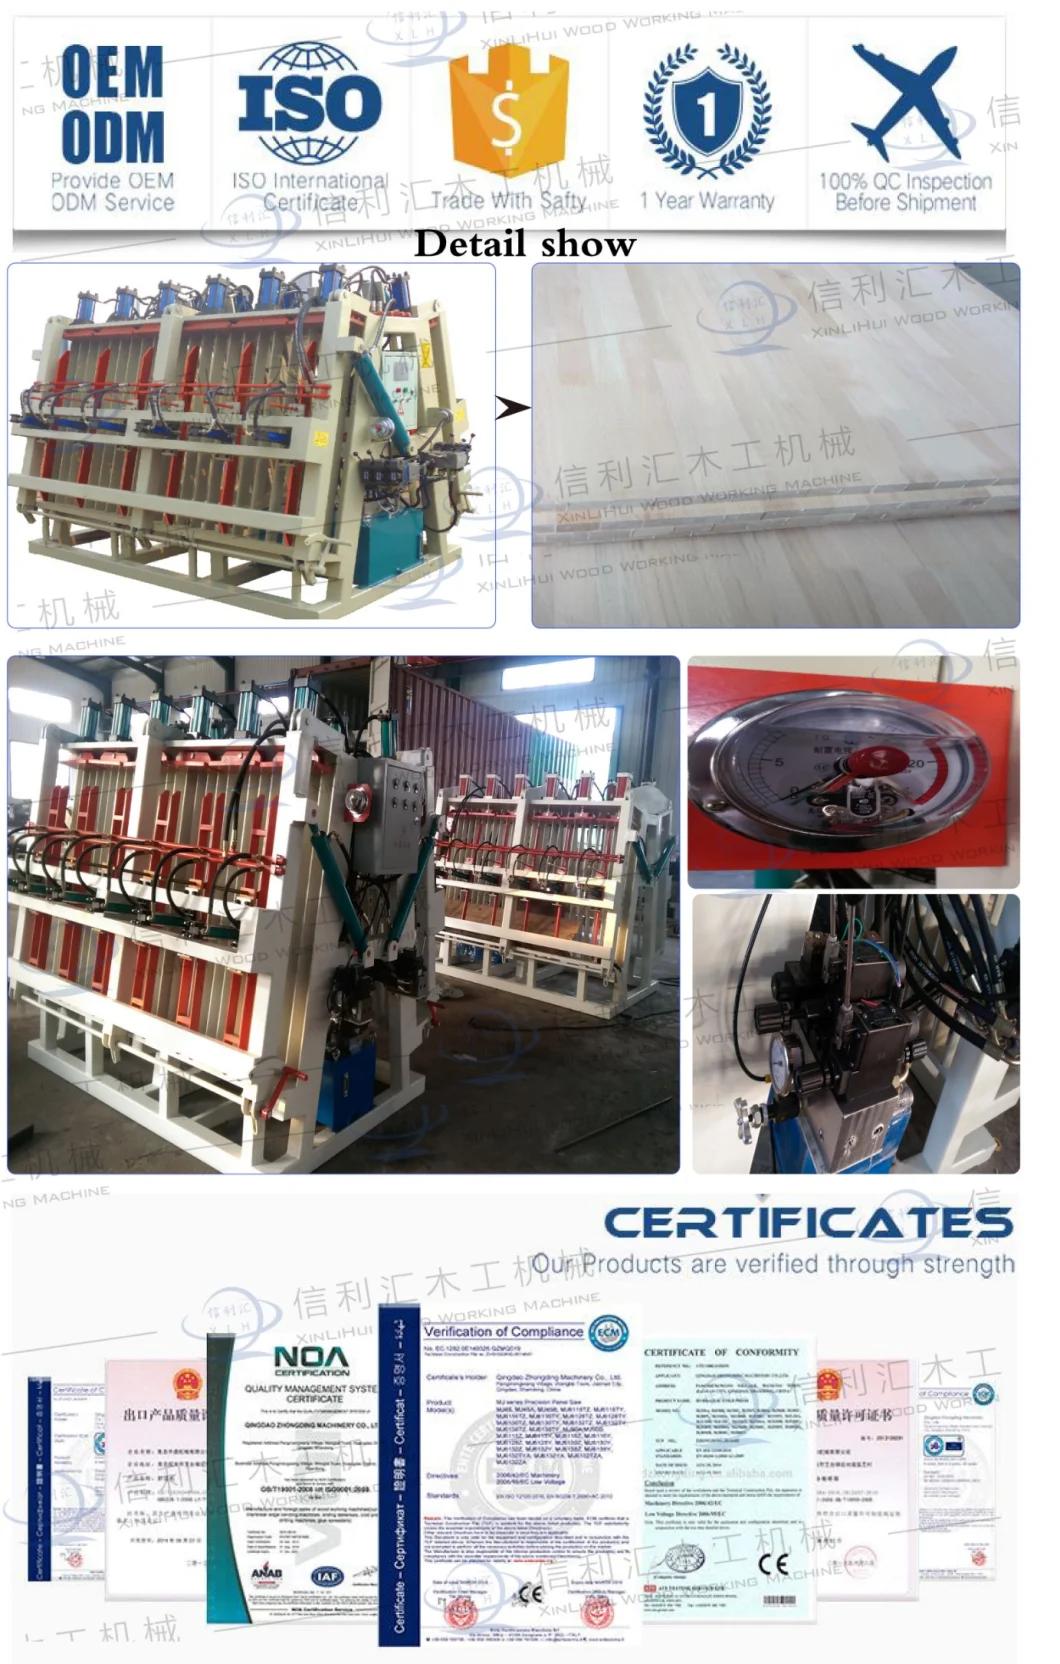 Wood-Working Wood Finger Joint Machine/ Composer Machine for Wood Construction/ Block Board Composing Machine/ Furniture Manufacturing Wood Board Jointer